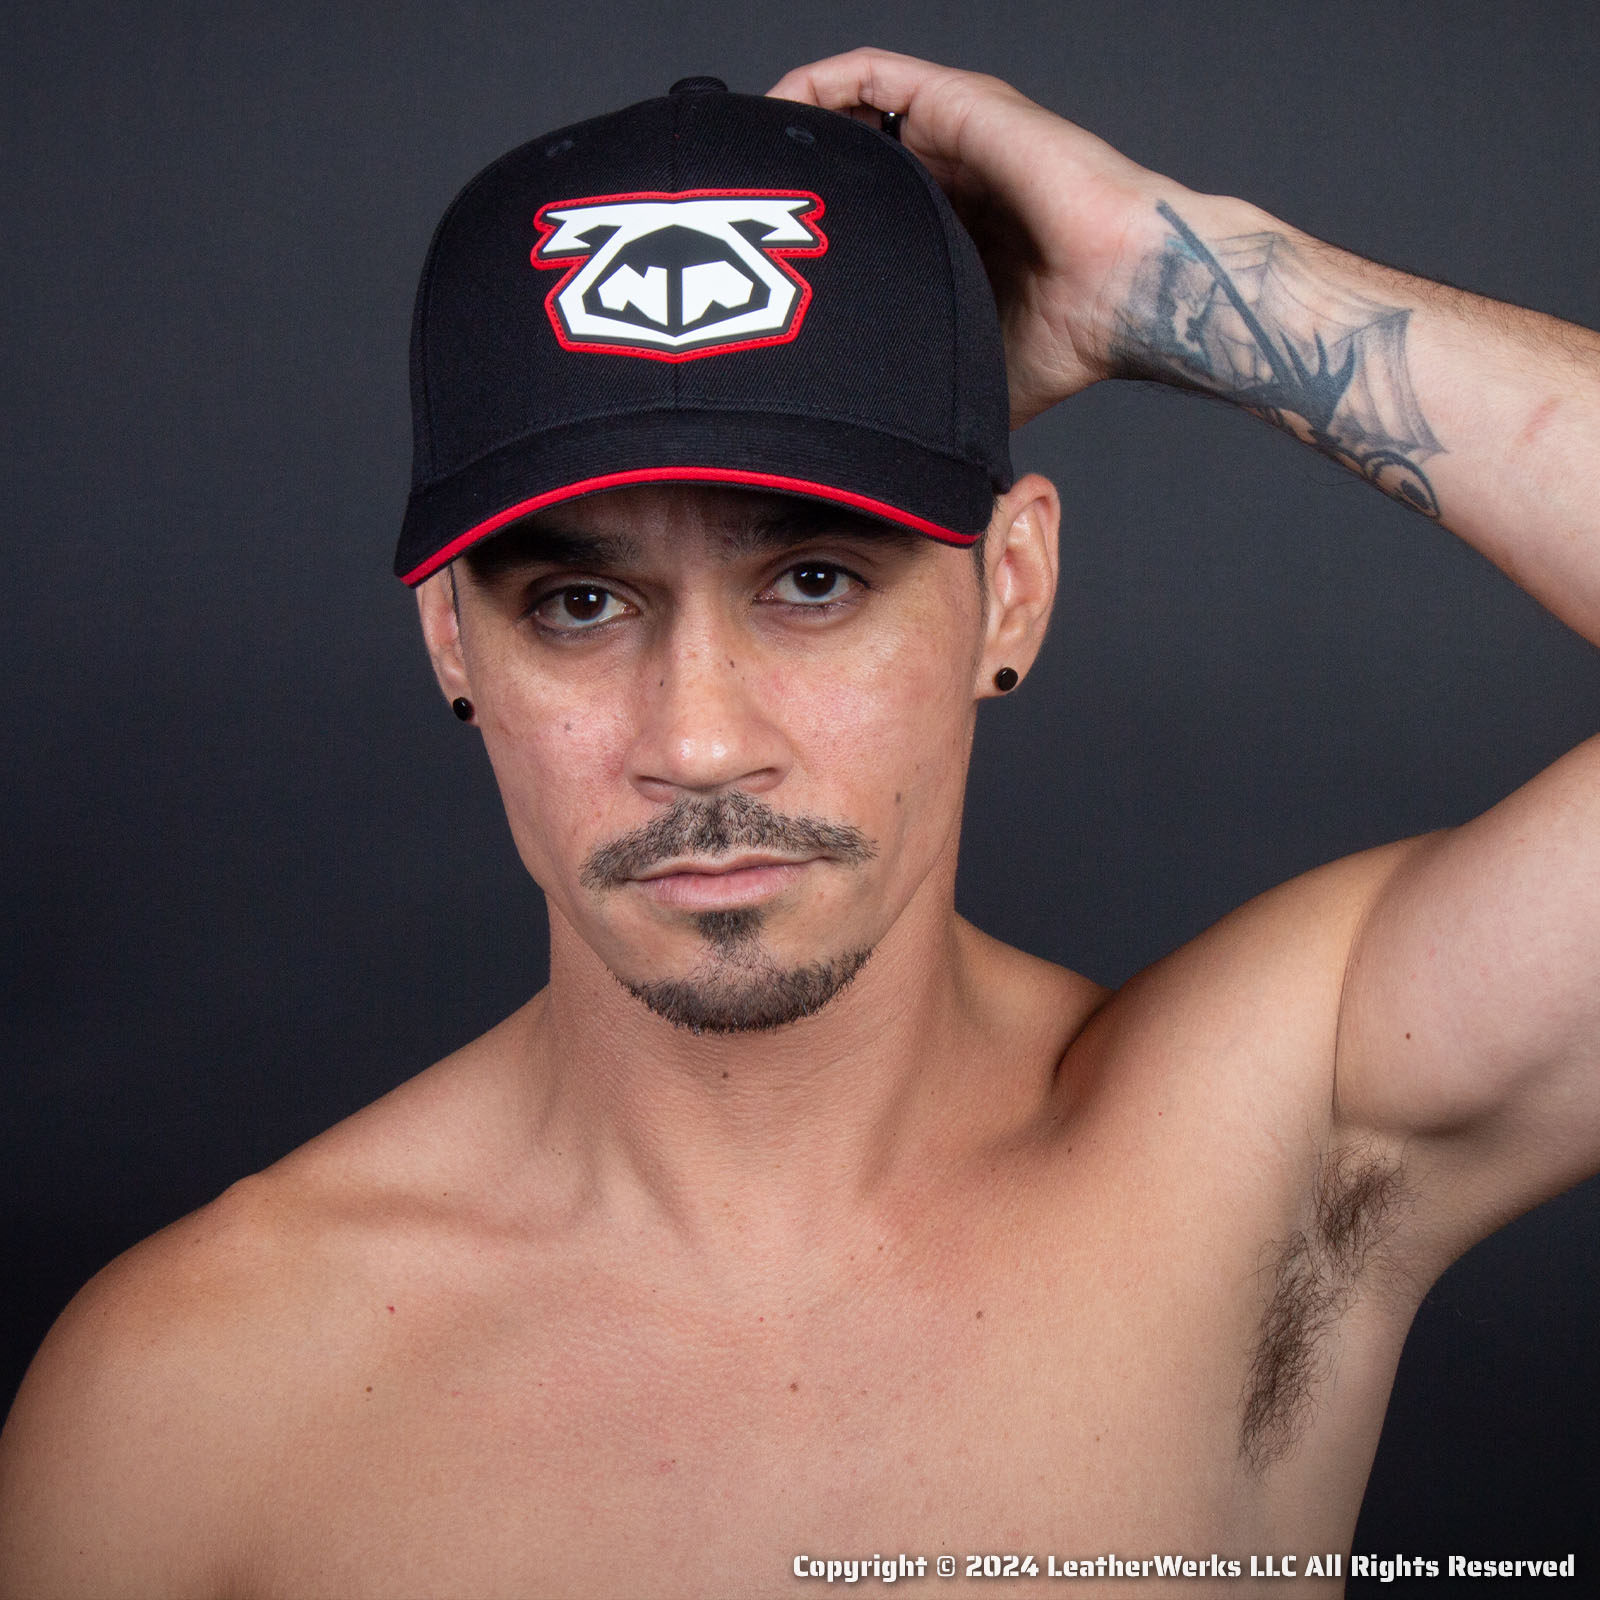 Nasty Pig Snout Cap 3.0 Red White and Black Front